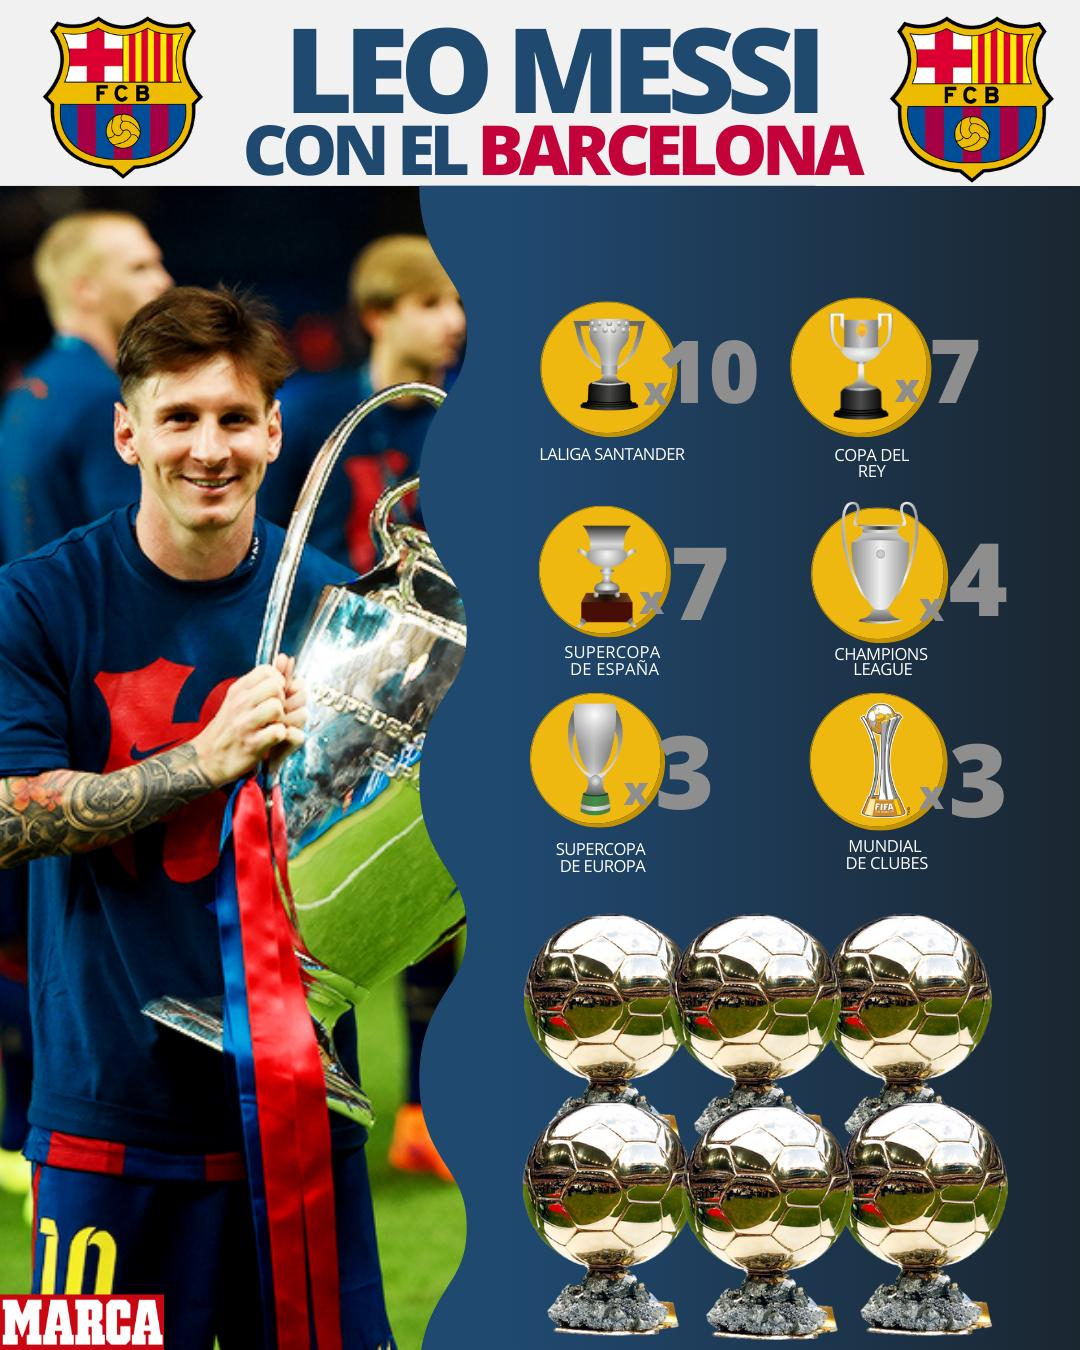 Barcelona Messi Lionel Messi's Barcelona record More than 30 titles